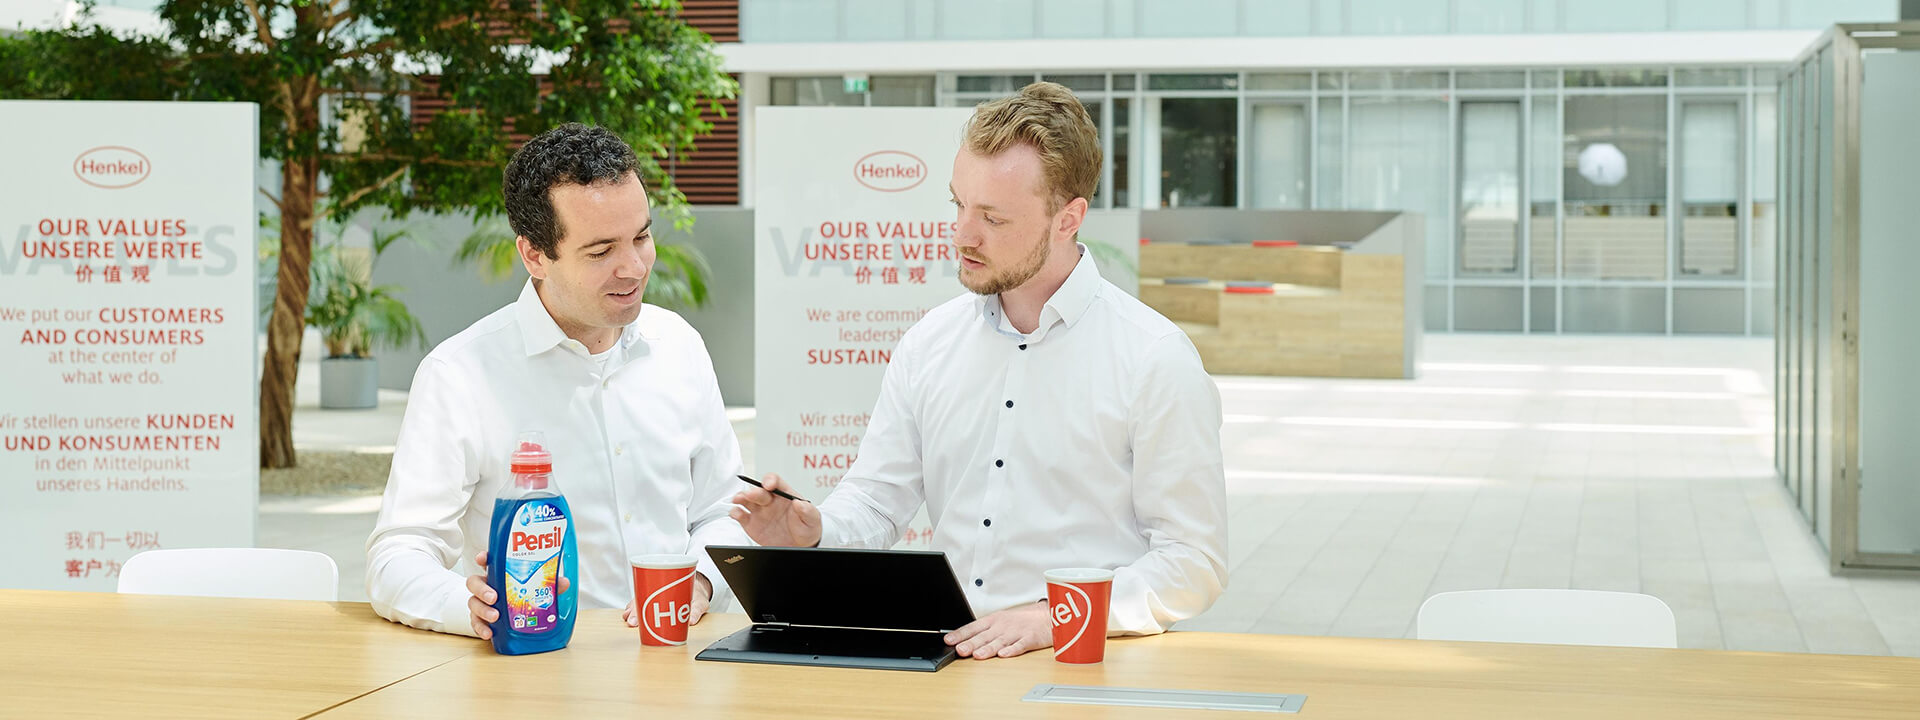  Henkel's Successful Migration to Remote Work: A Digital Transformation Case Study - IoT ONE Case Study